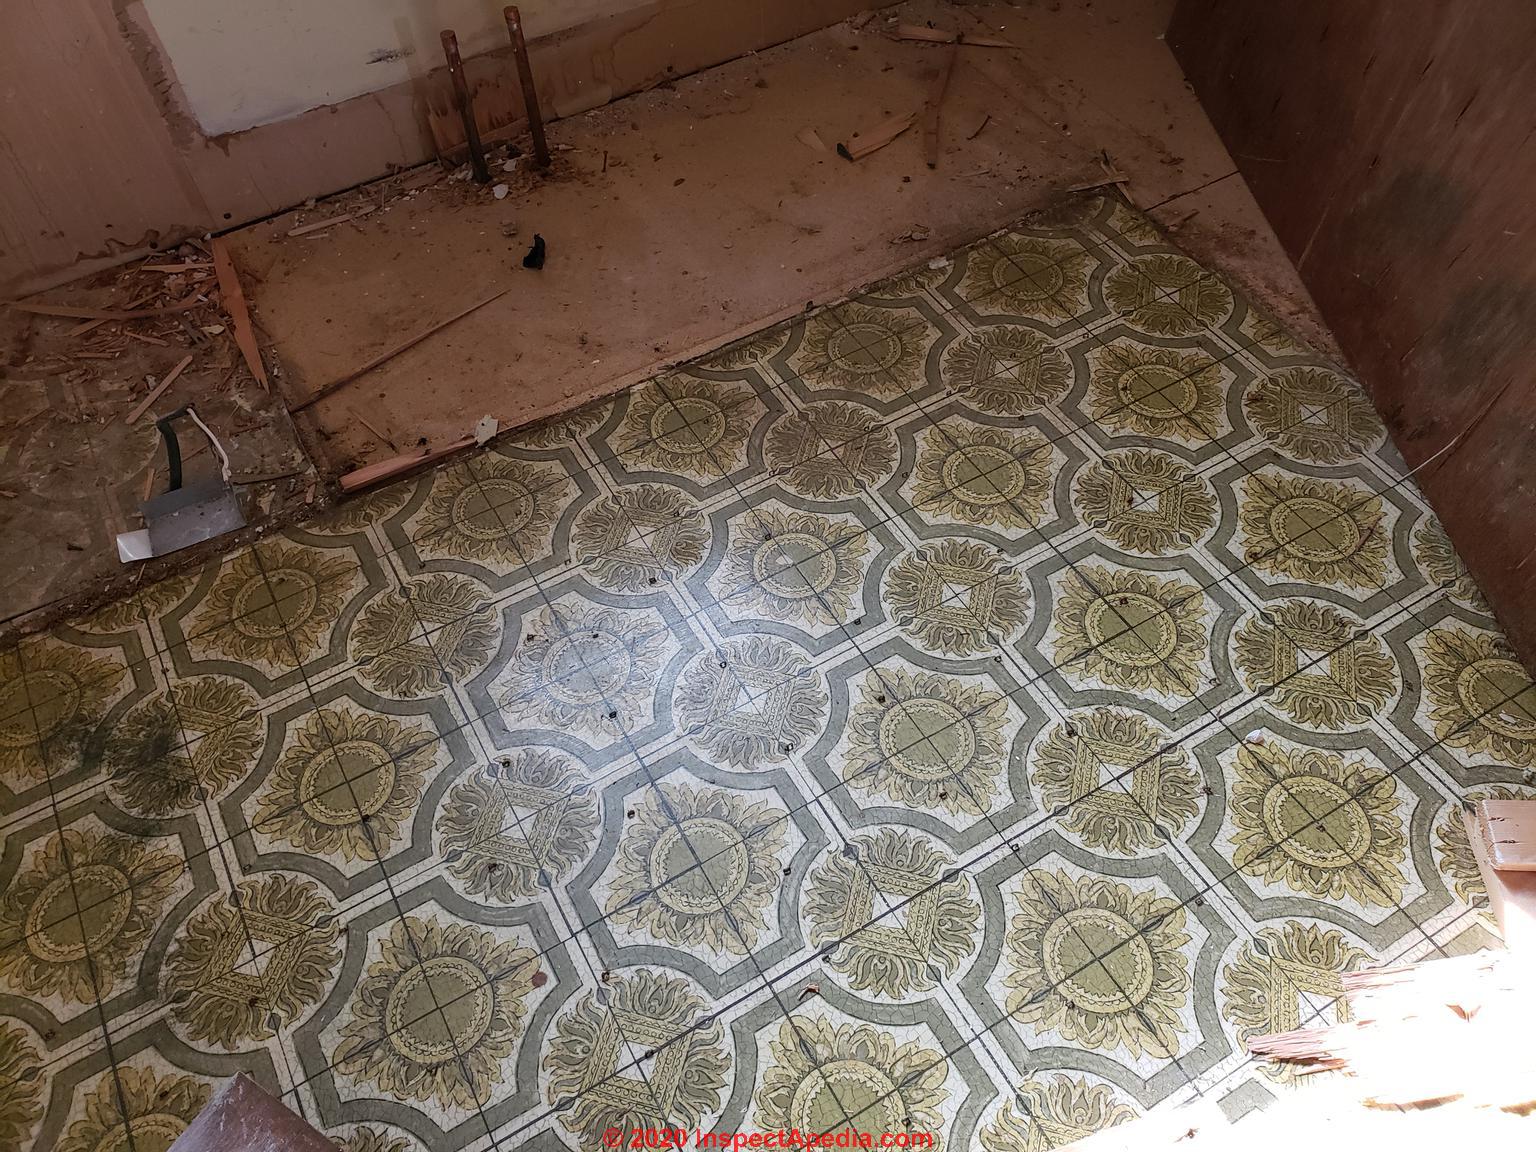 1970 S Floor Tiles That May Contain Asbestos